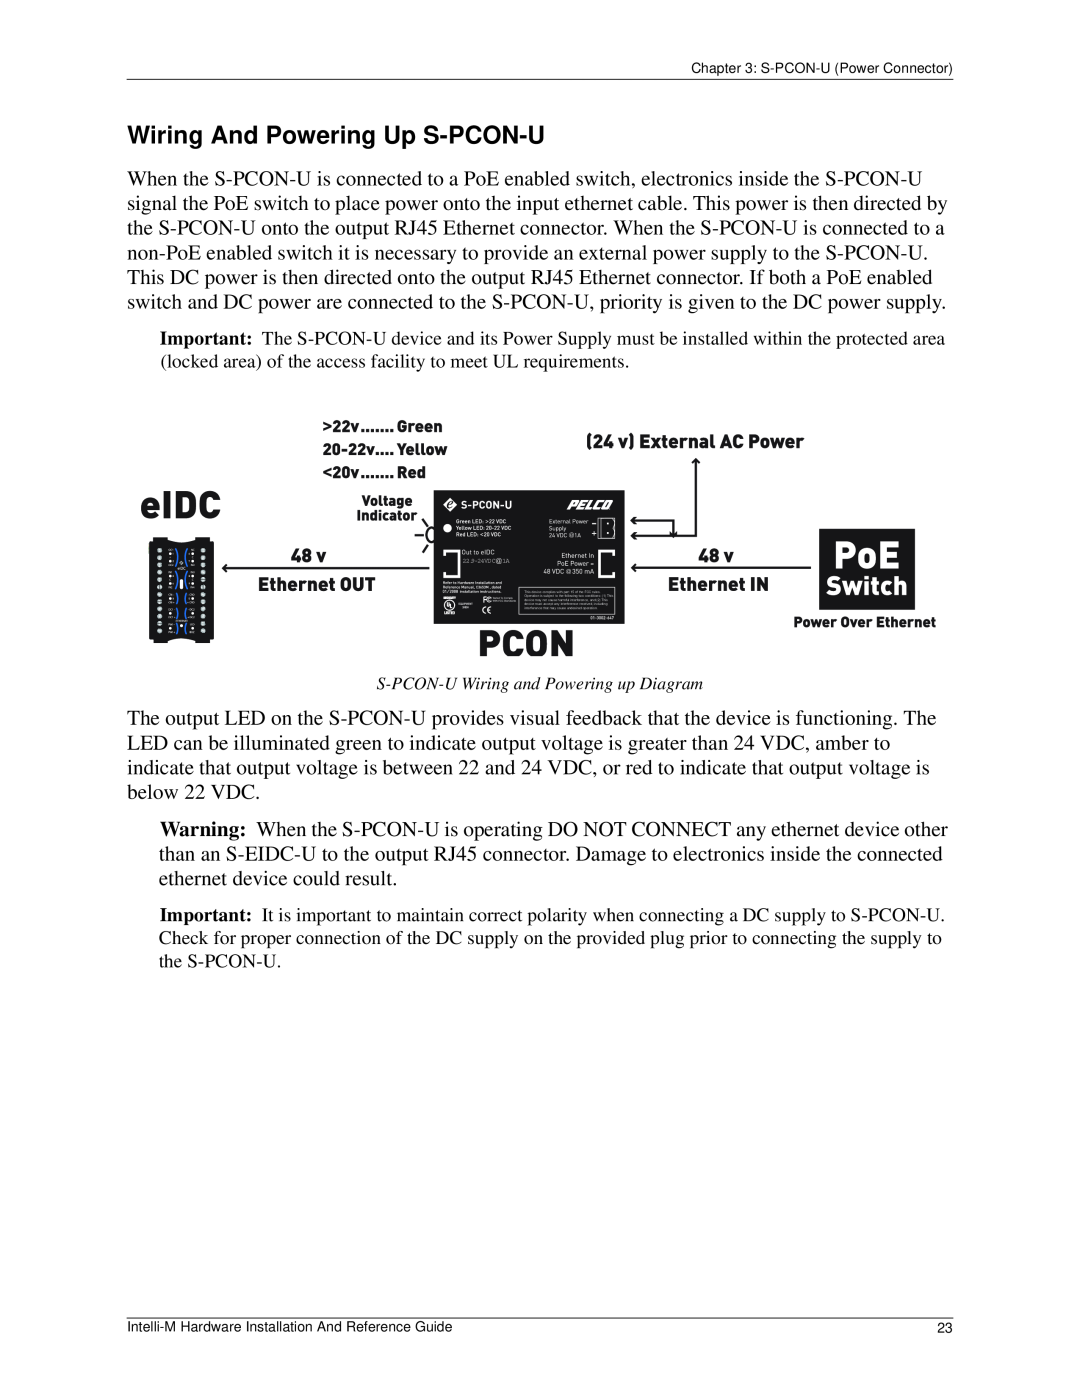 Pelco c3653m-a manual Wiring And Powering Up S-PCON-U, S-PCON-UWiring and Powering up Diagram 